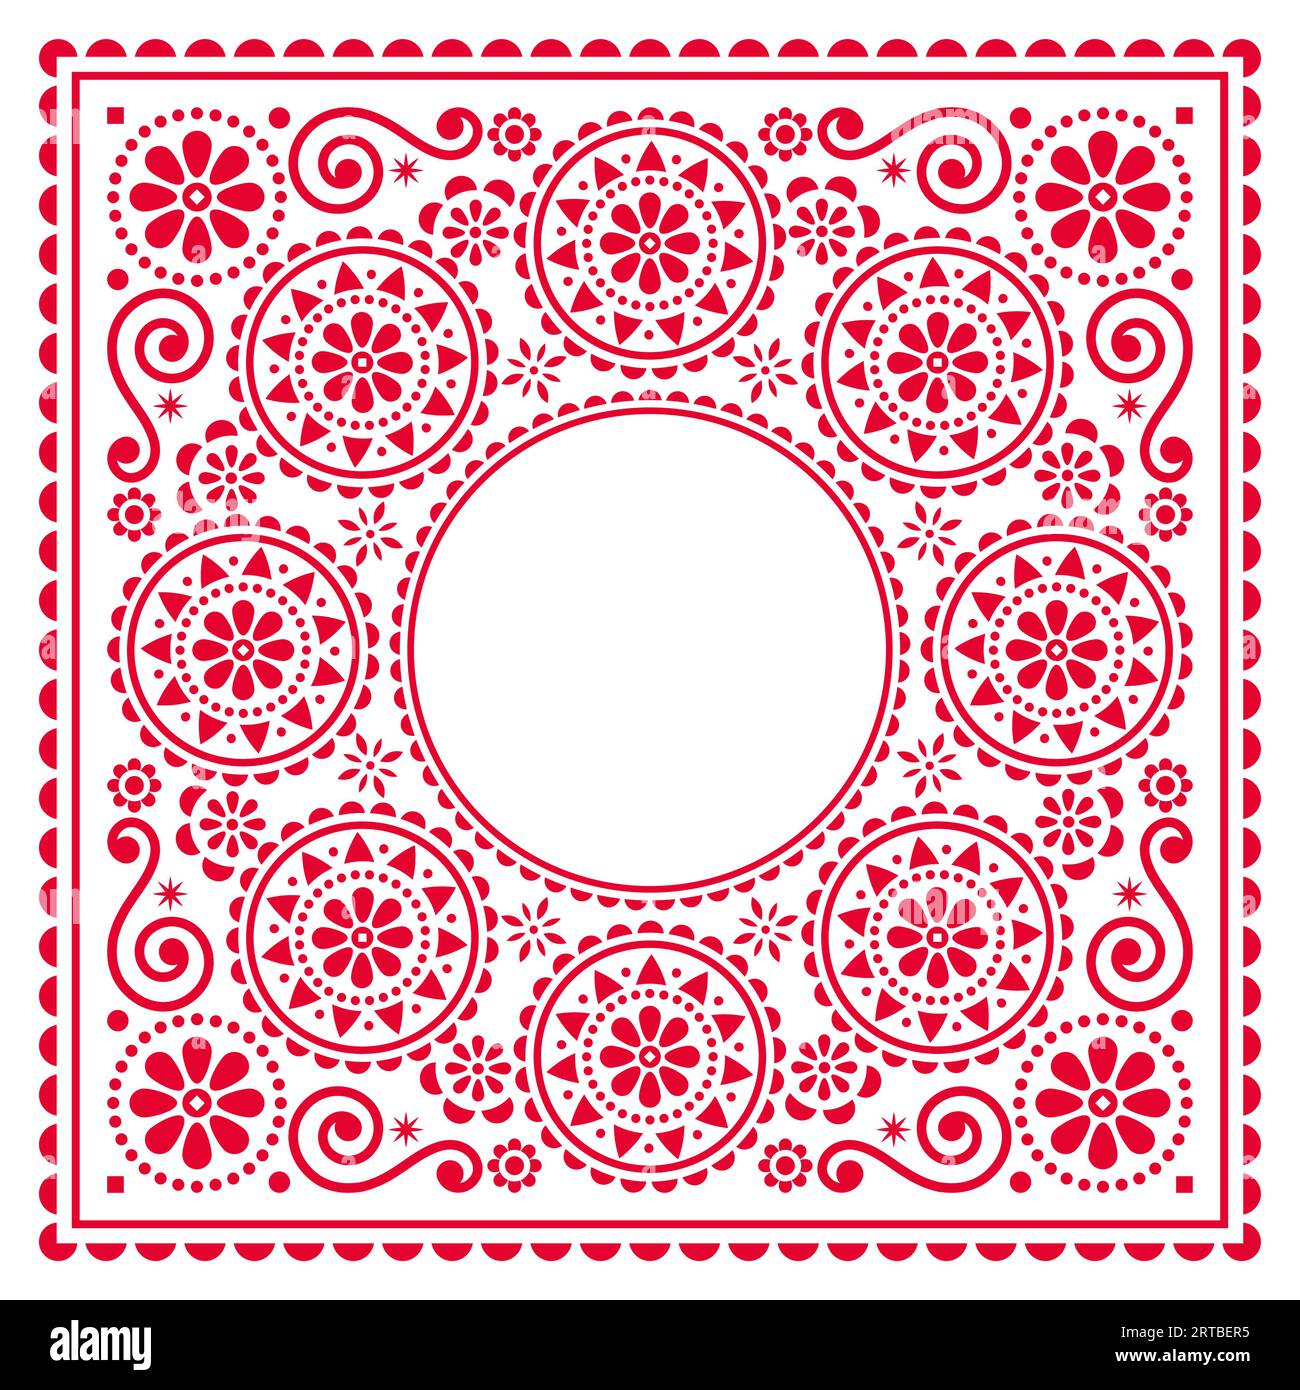 Valentine's Day vector greeting card or wedding invitation design with floral frame and space for text - Scandinavian folk art style pattern with hear Stock Vector